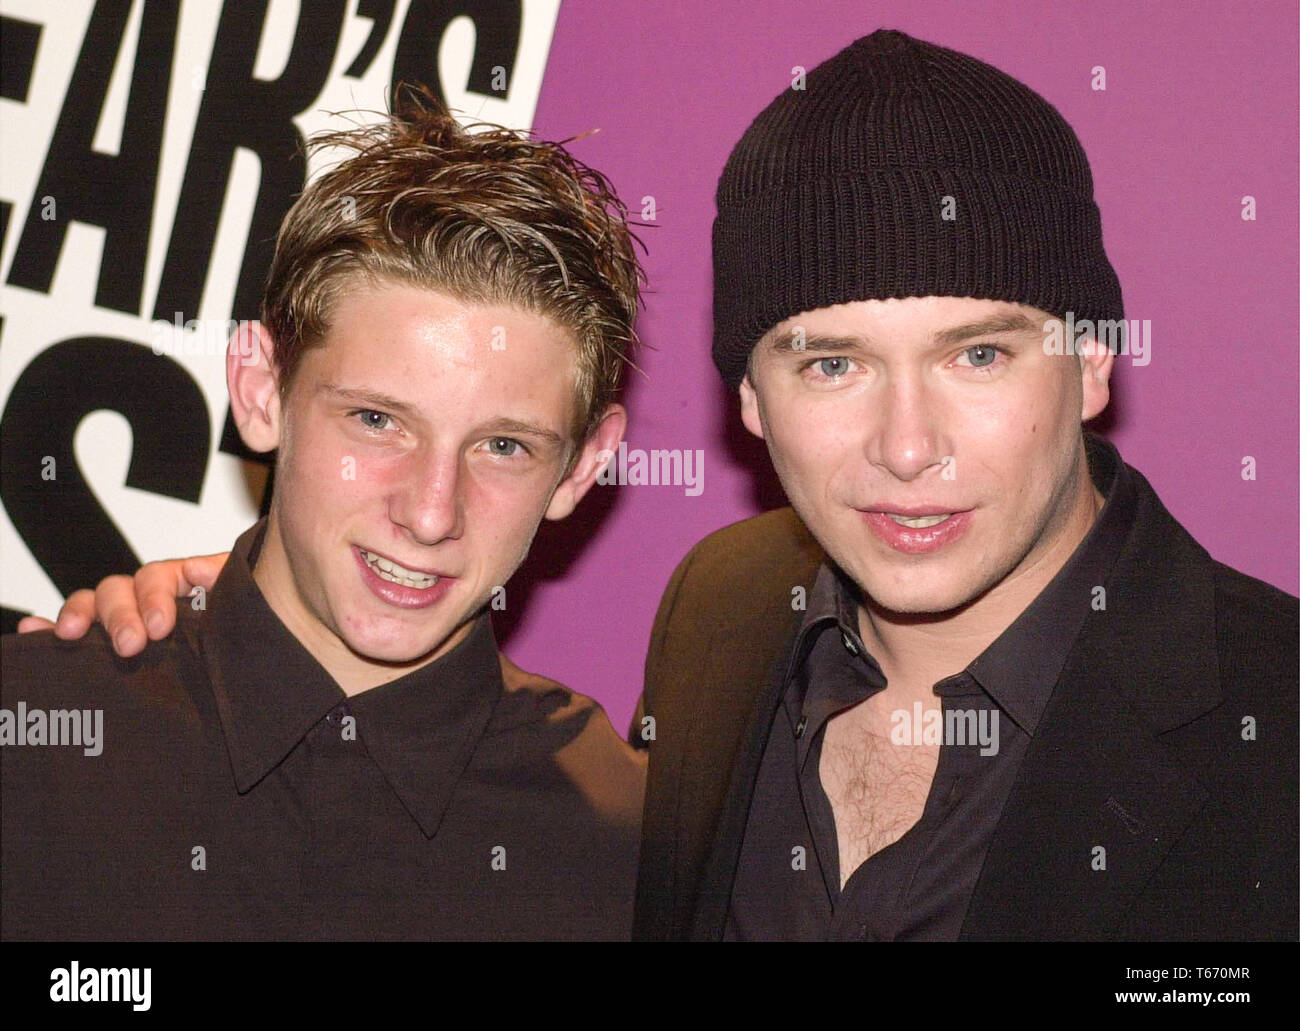 UK Premiere of Billy Elliot at UGC Cinema, Edinburgh tonight. Sunday 20/8/00. Pictured is star of the film Jamie Bell and Stephen Gately of Boyzone who's new single I Believe features in the film. Stock Photo